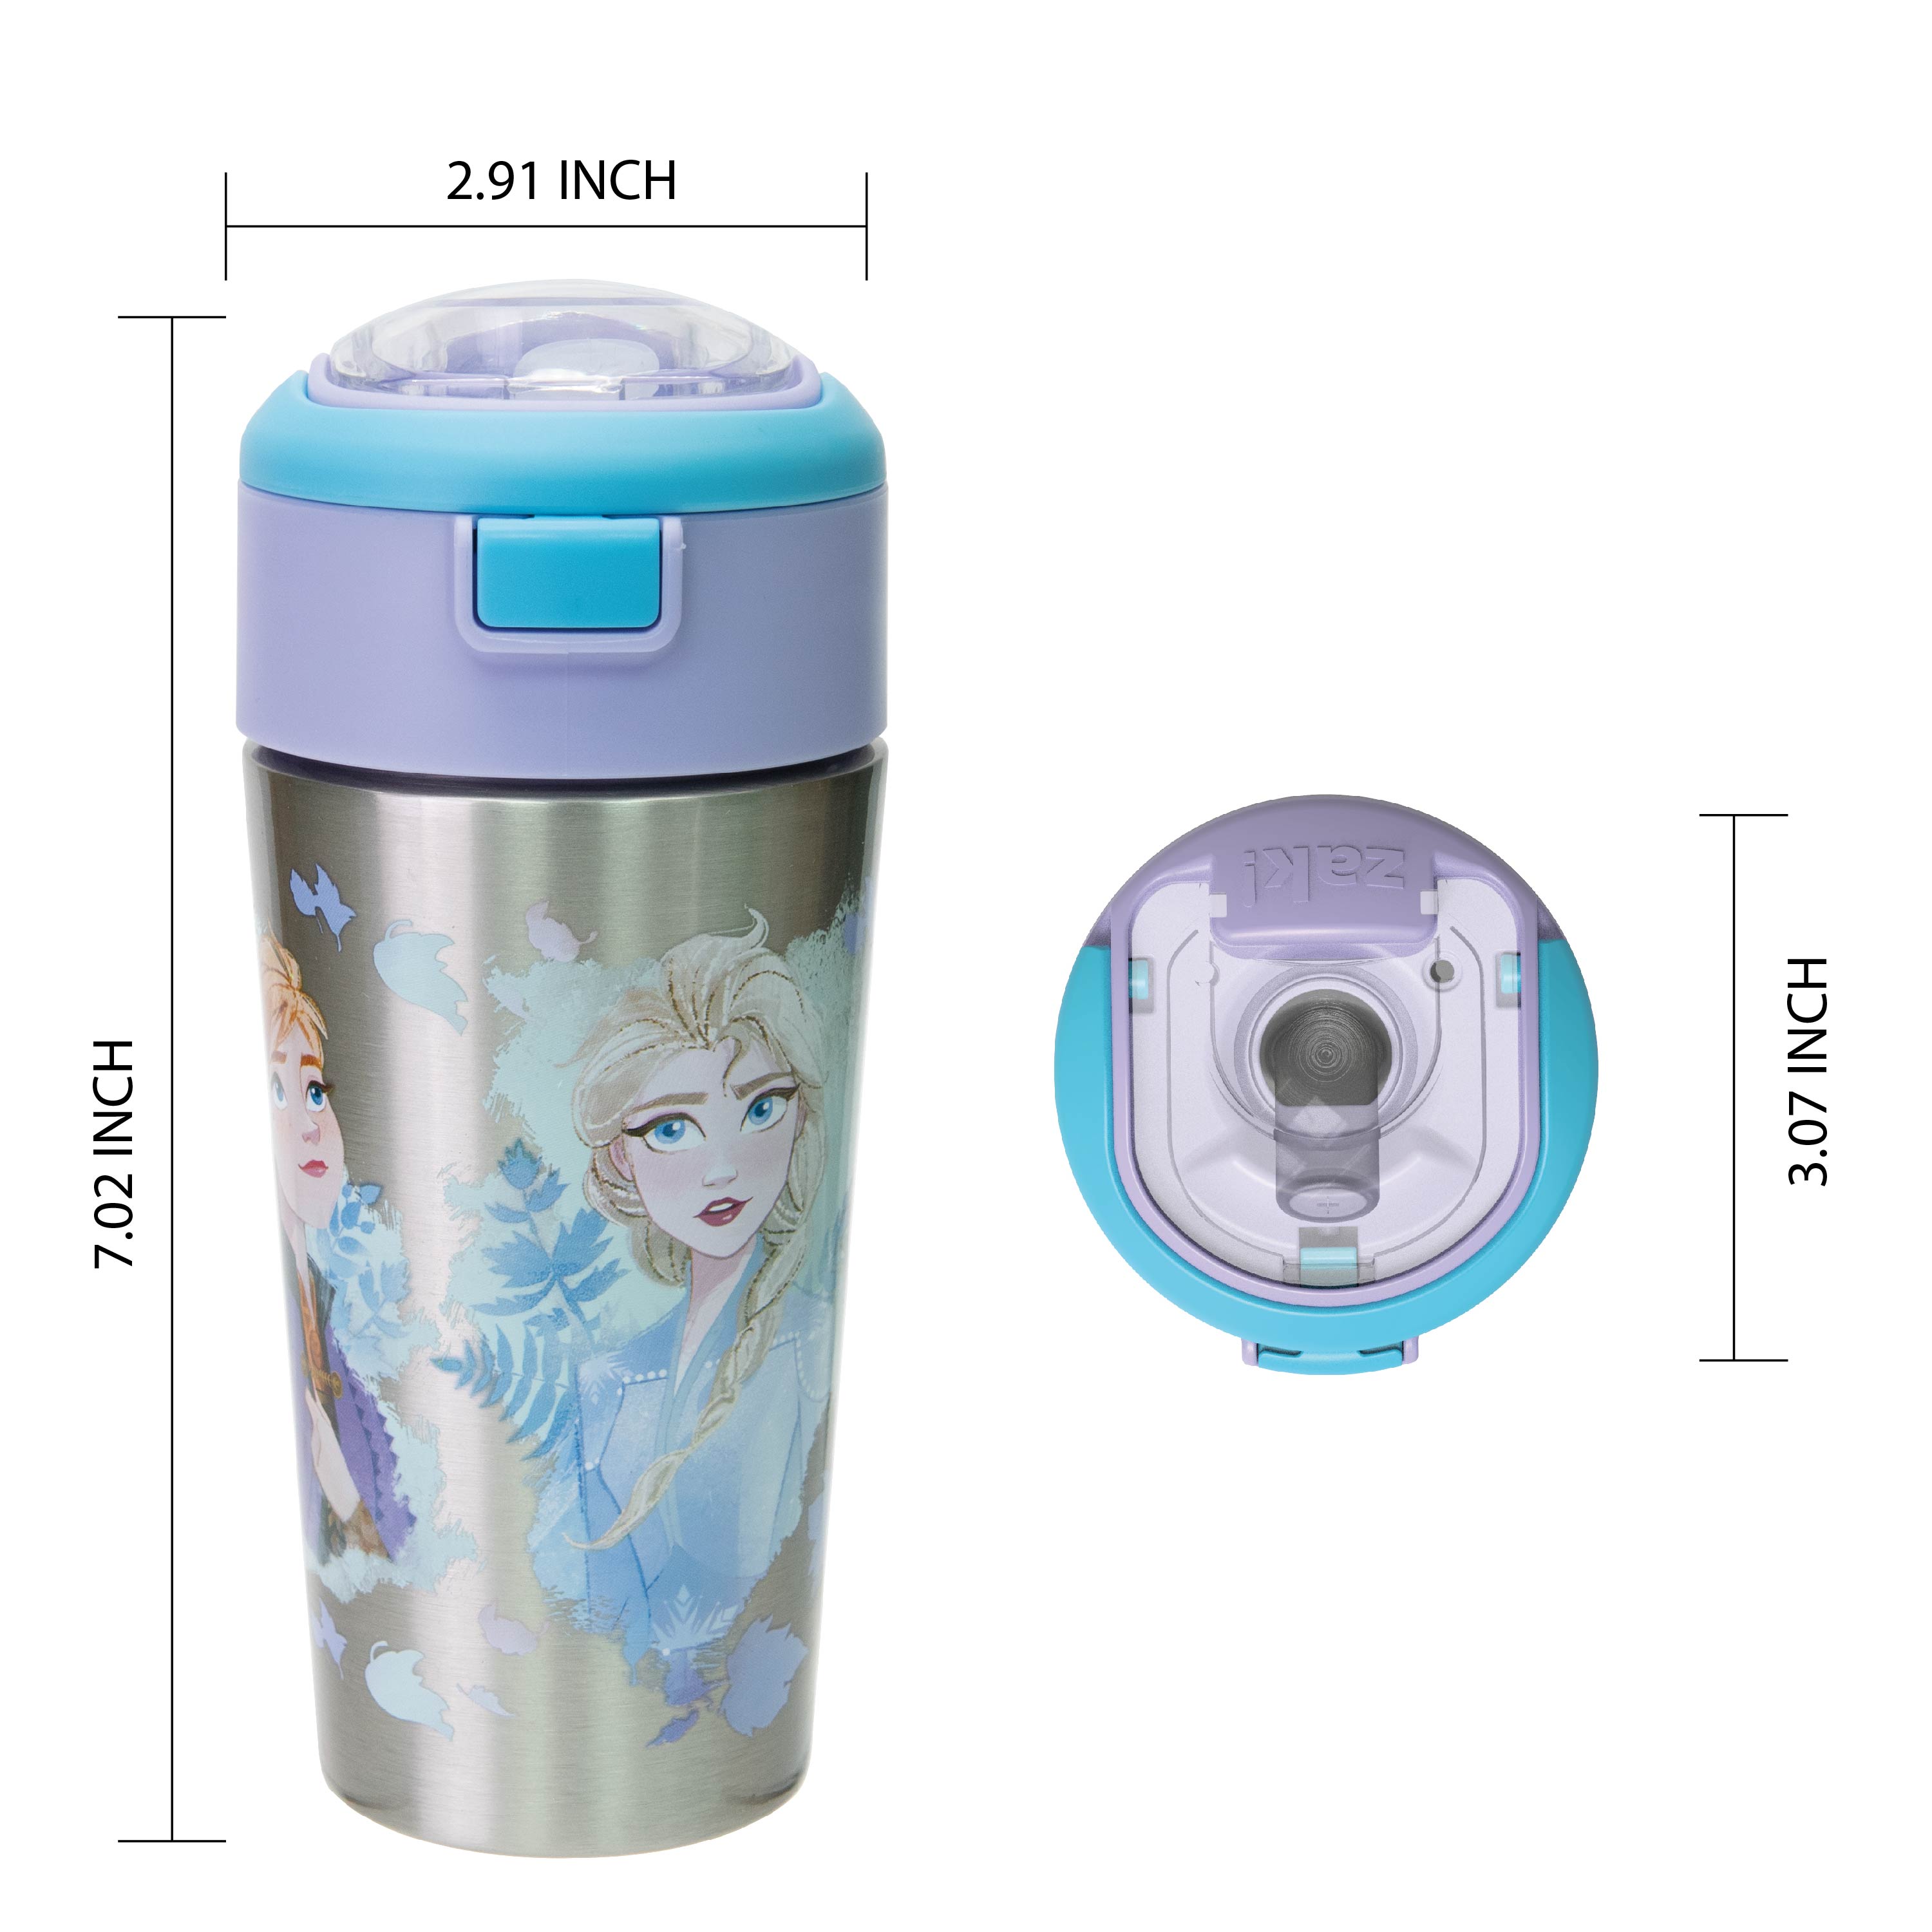 Disney Frozen 2 Movie 12 ounce Vacuum Insulated Reusable Stainless Steel Water Bottle, Anna, Elsa & Olaf slideshow image 6